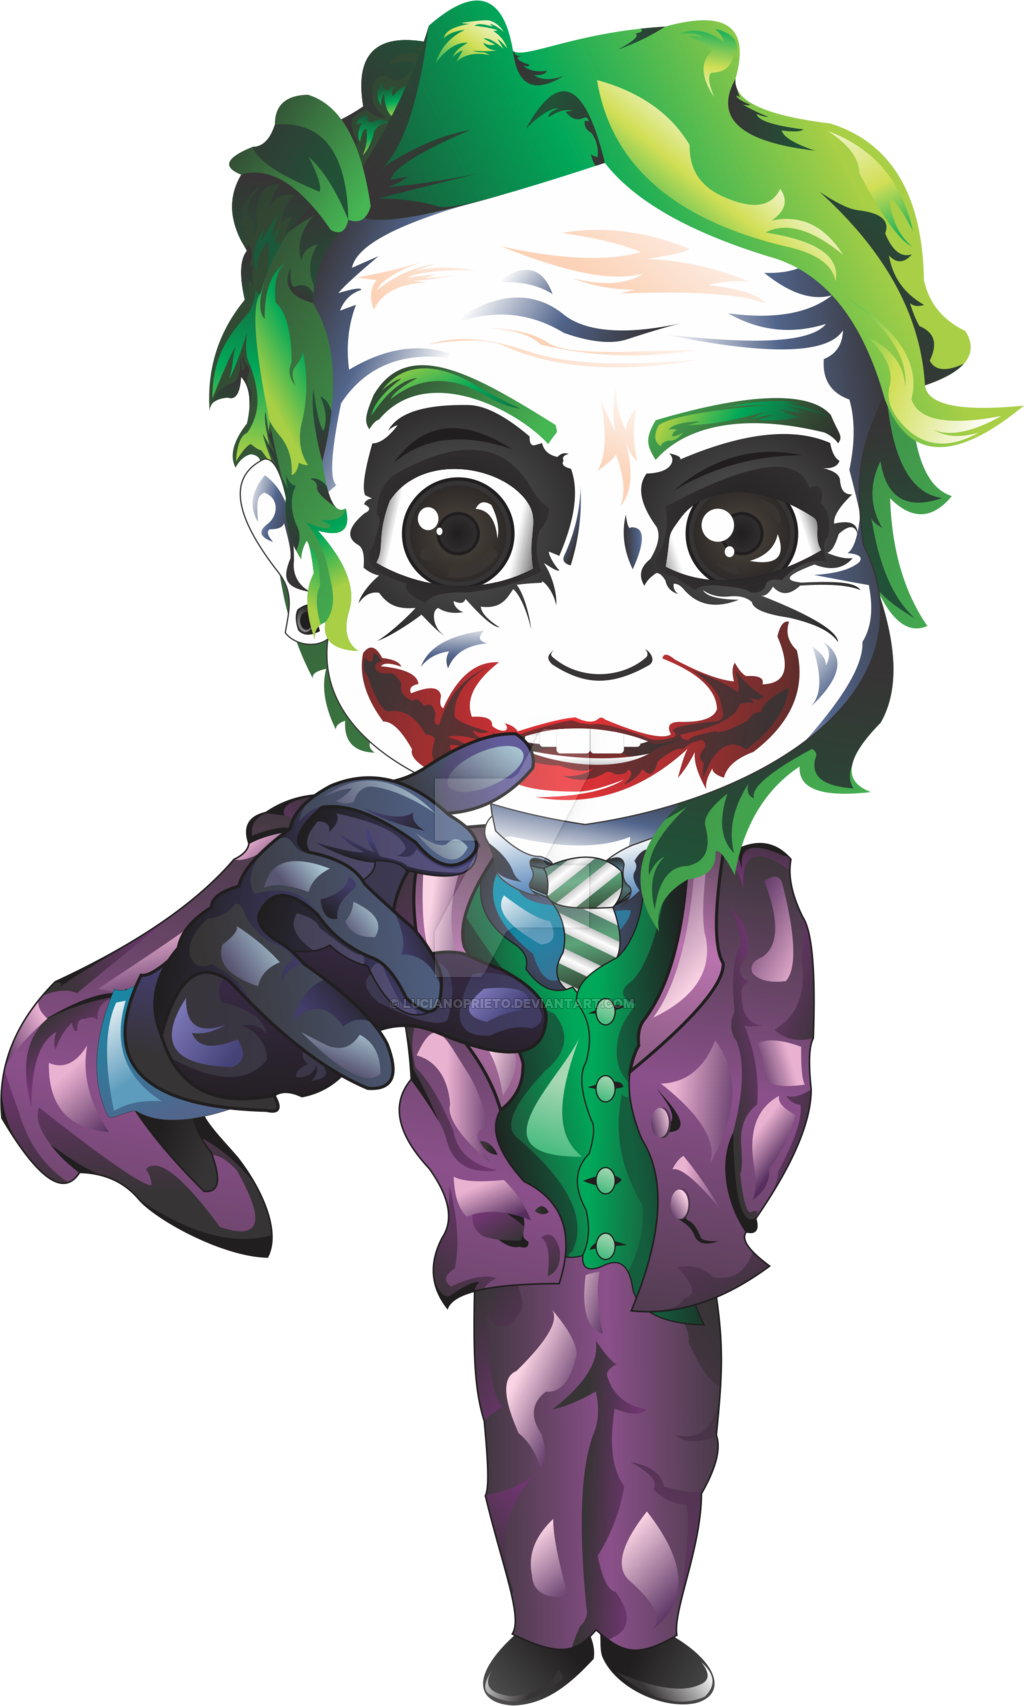 Joker Watercolor Icon Png Clipart Image Joker Photos | Images and ...